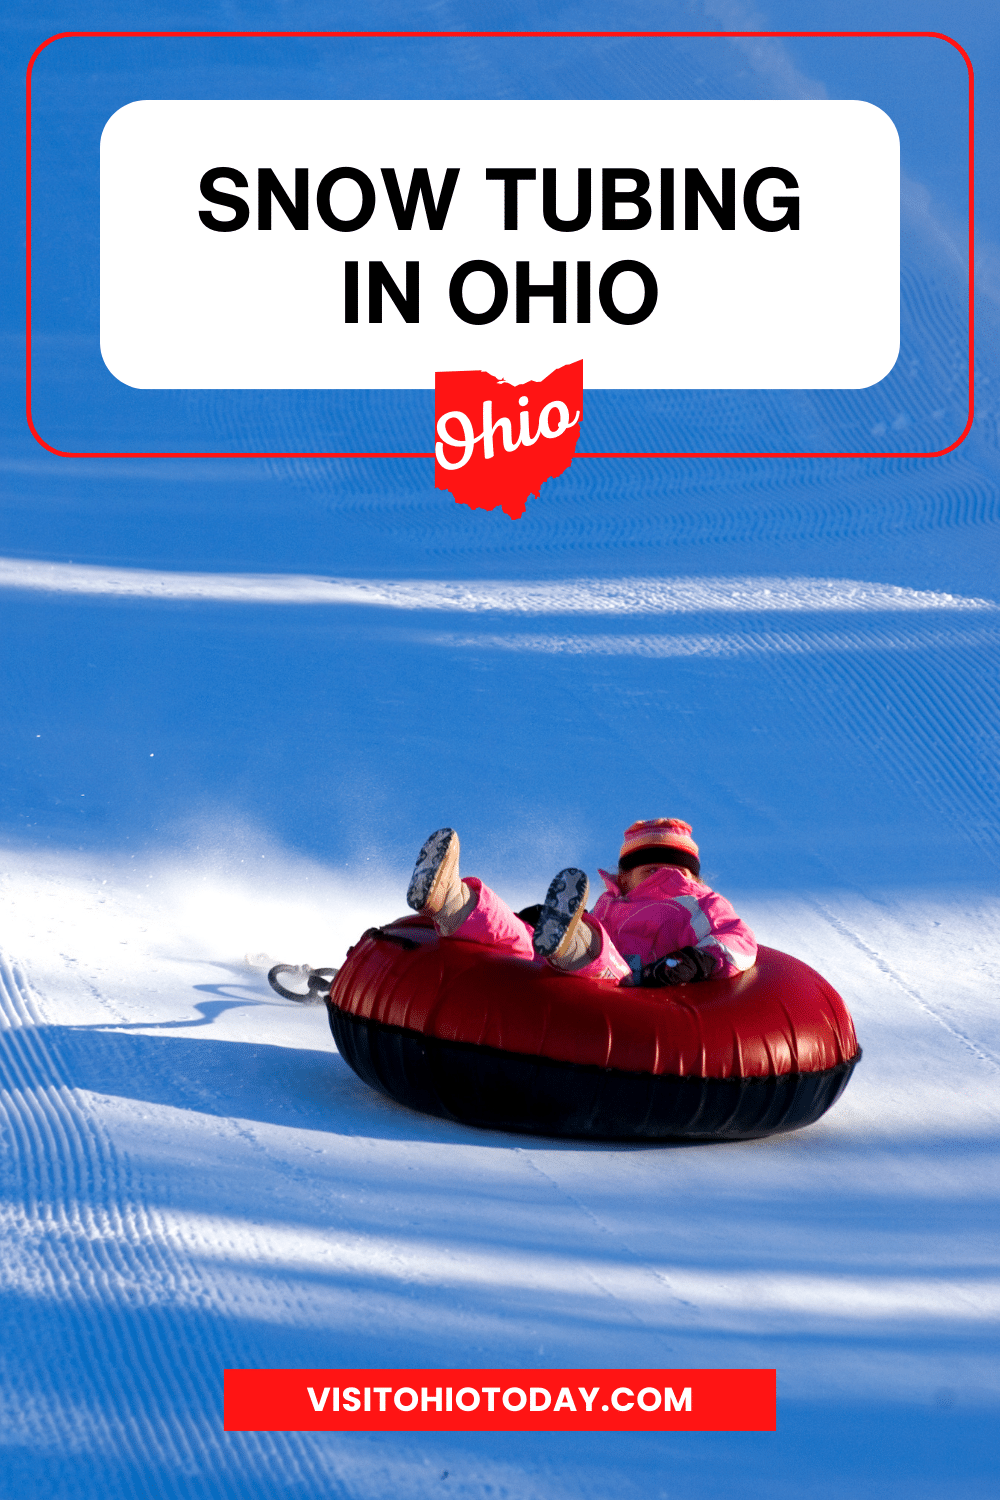 vertical image with a photo of a young child snow tubing on a snow slope. A white box at the top has the text Snow Tubing in Ohio